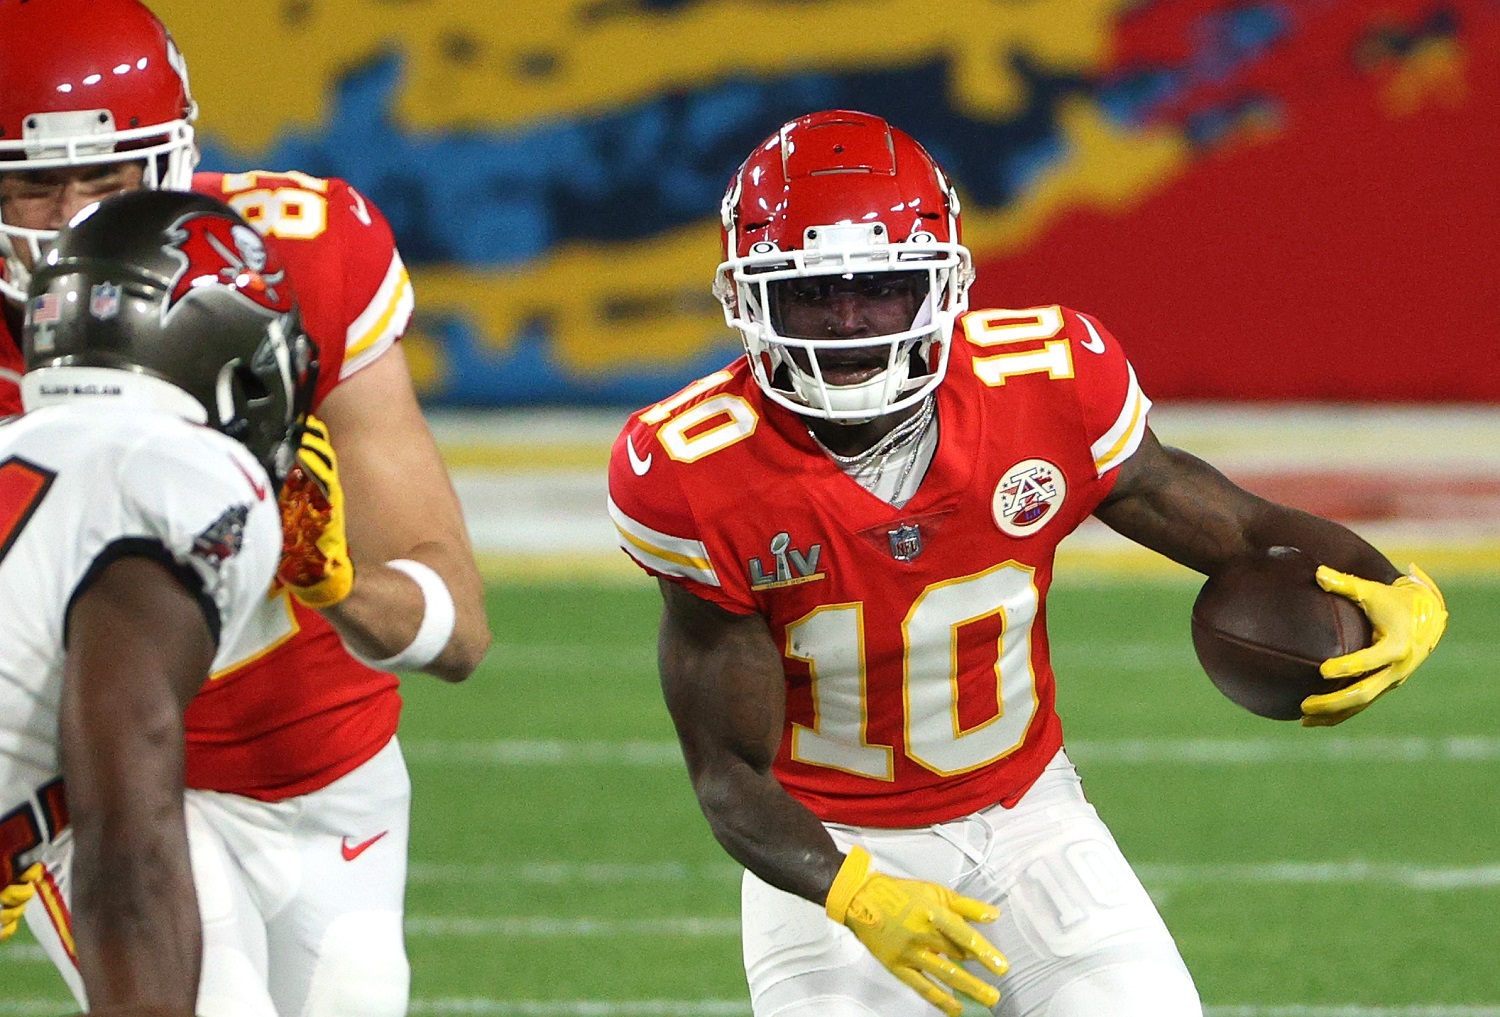 Tyreek Hill of the Kansas City Chiefs makes a reception during the first quarter against the Tampa Bay Buccaneers in Super Bowl 55.